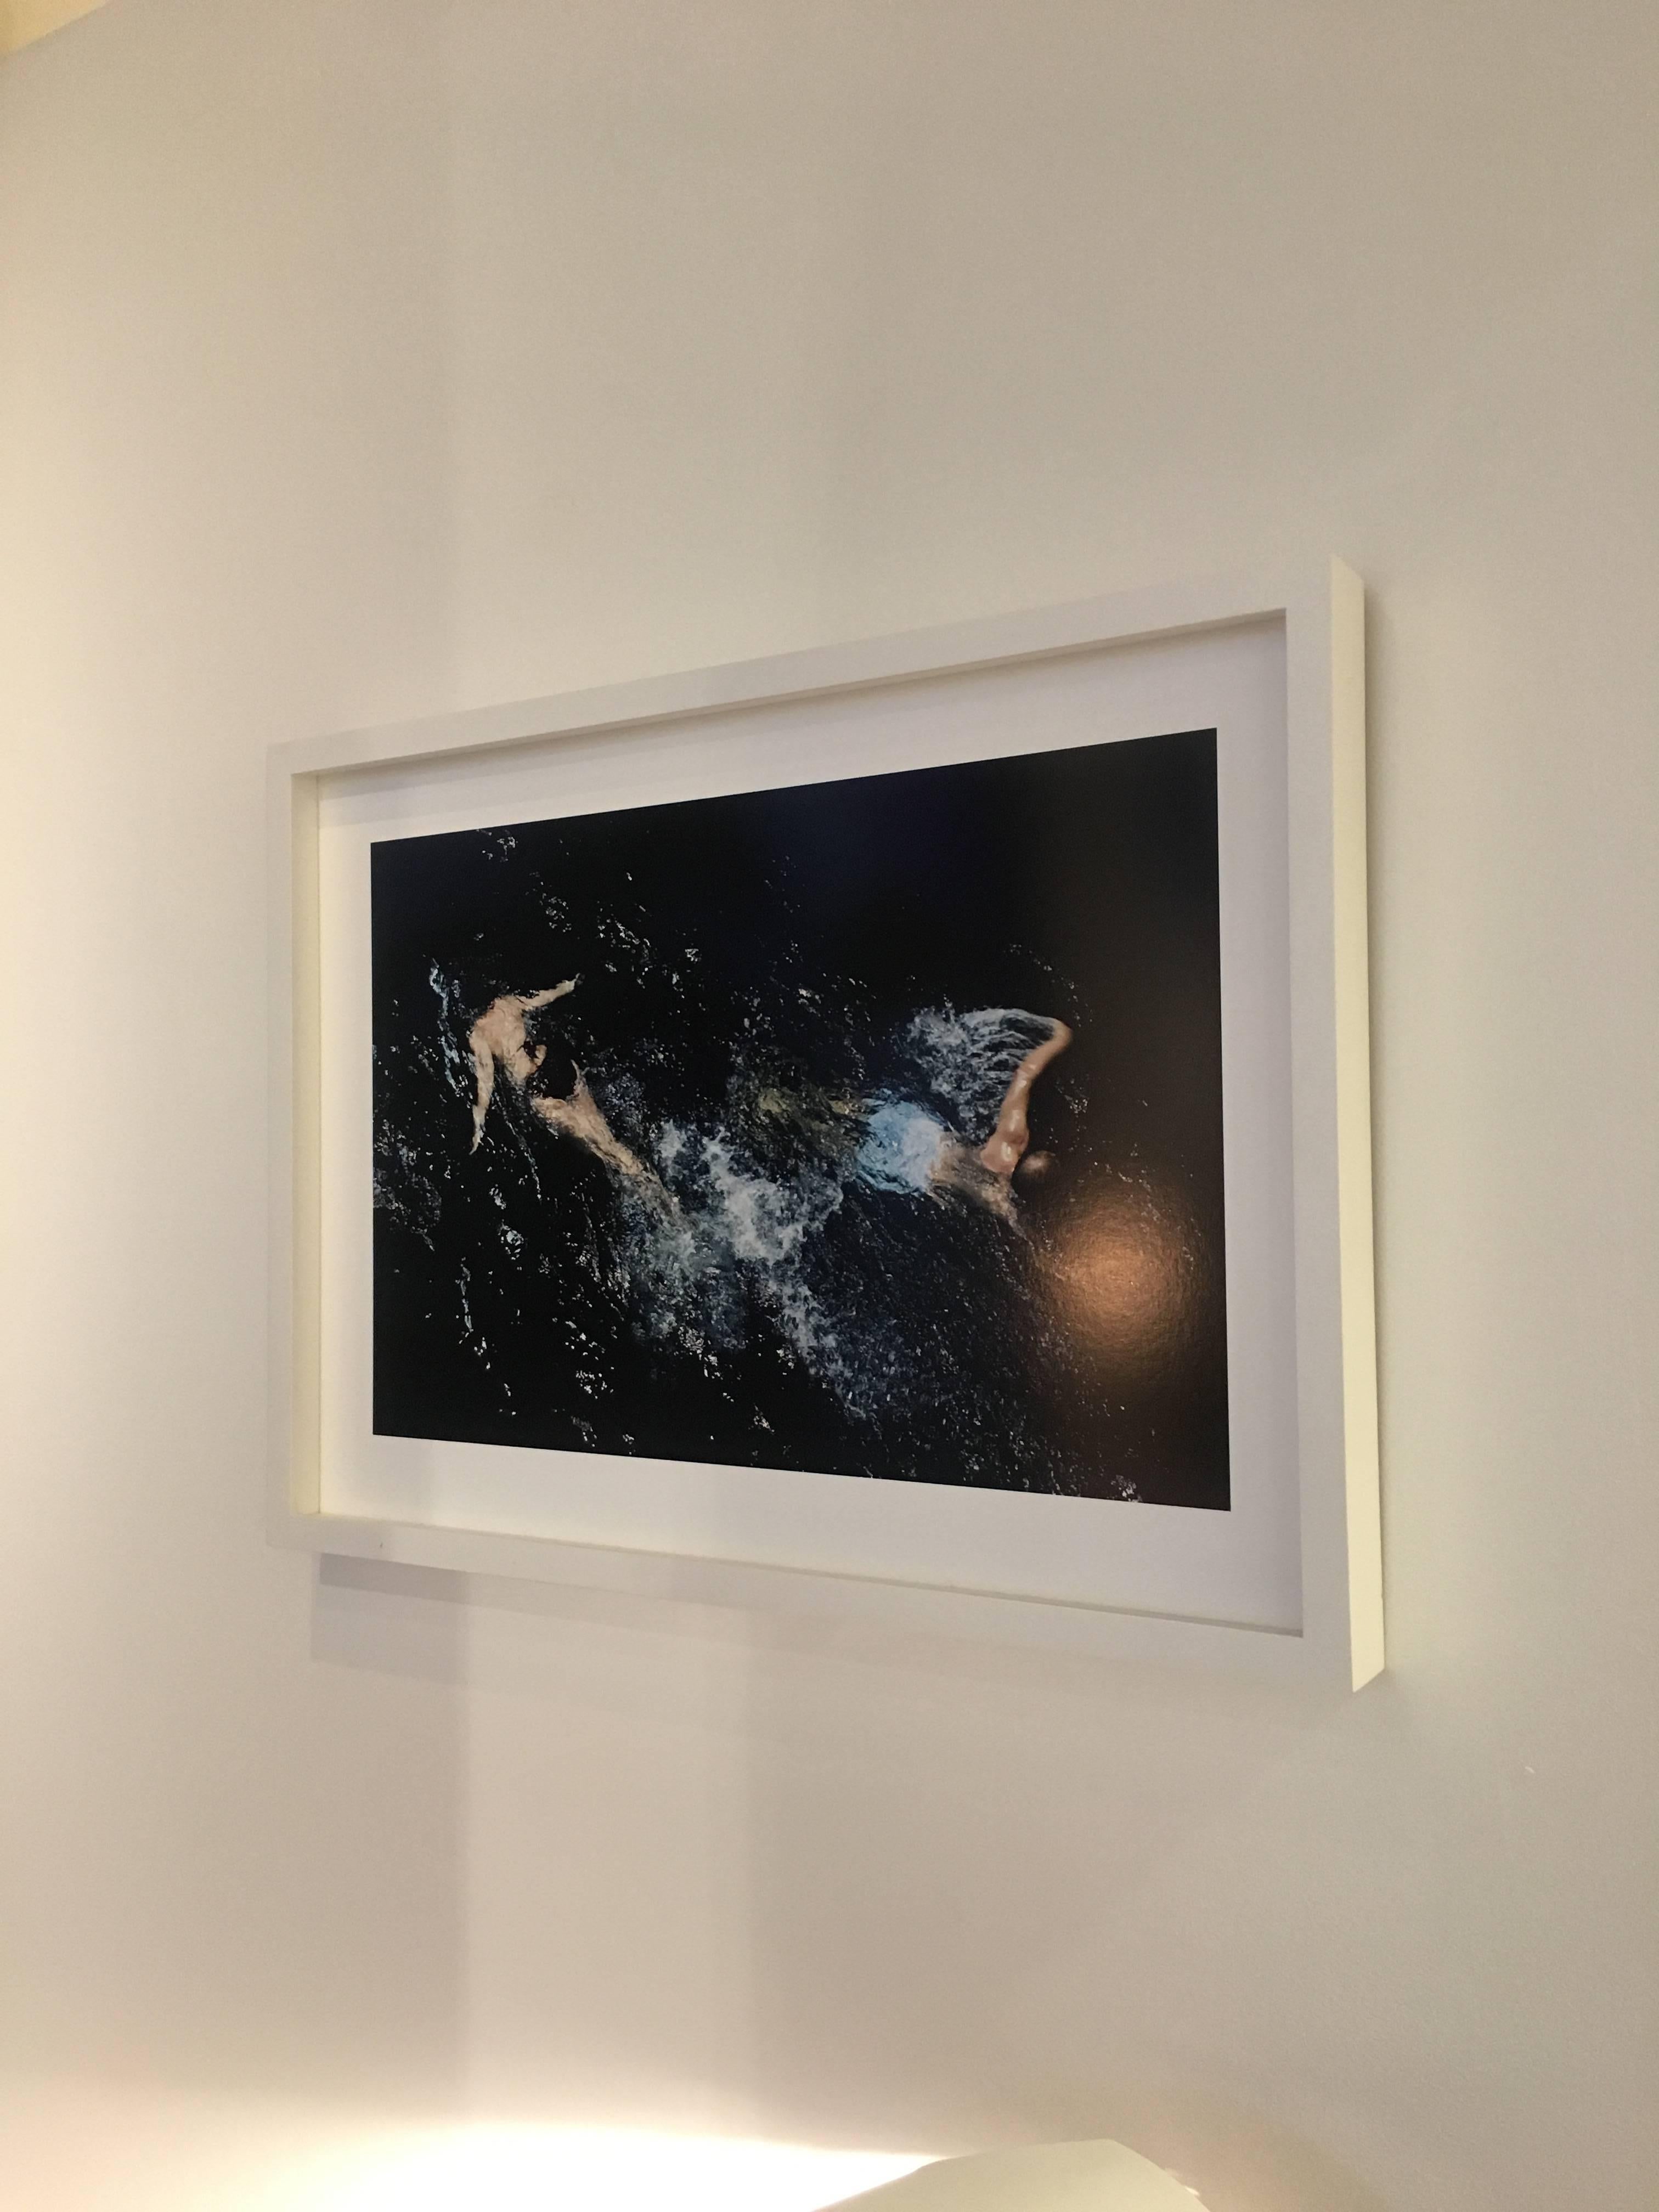 Framed archival pigment print on Baryta Fiber Paper by Francine Fleischer, 2013. This photo series was taken in a magical swimming hole that had been used by an ancient civilization for human sacrifice. Today it is used by swimmers for recreational